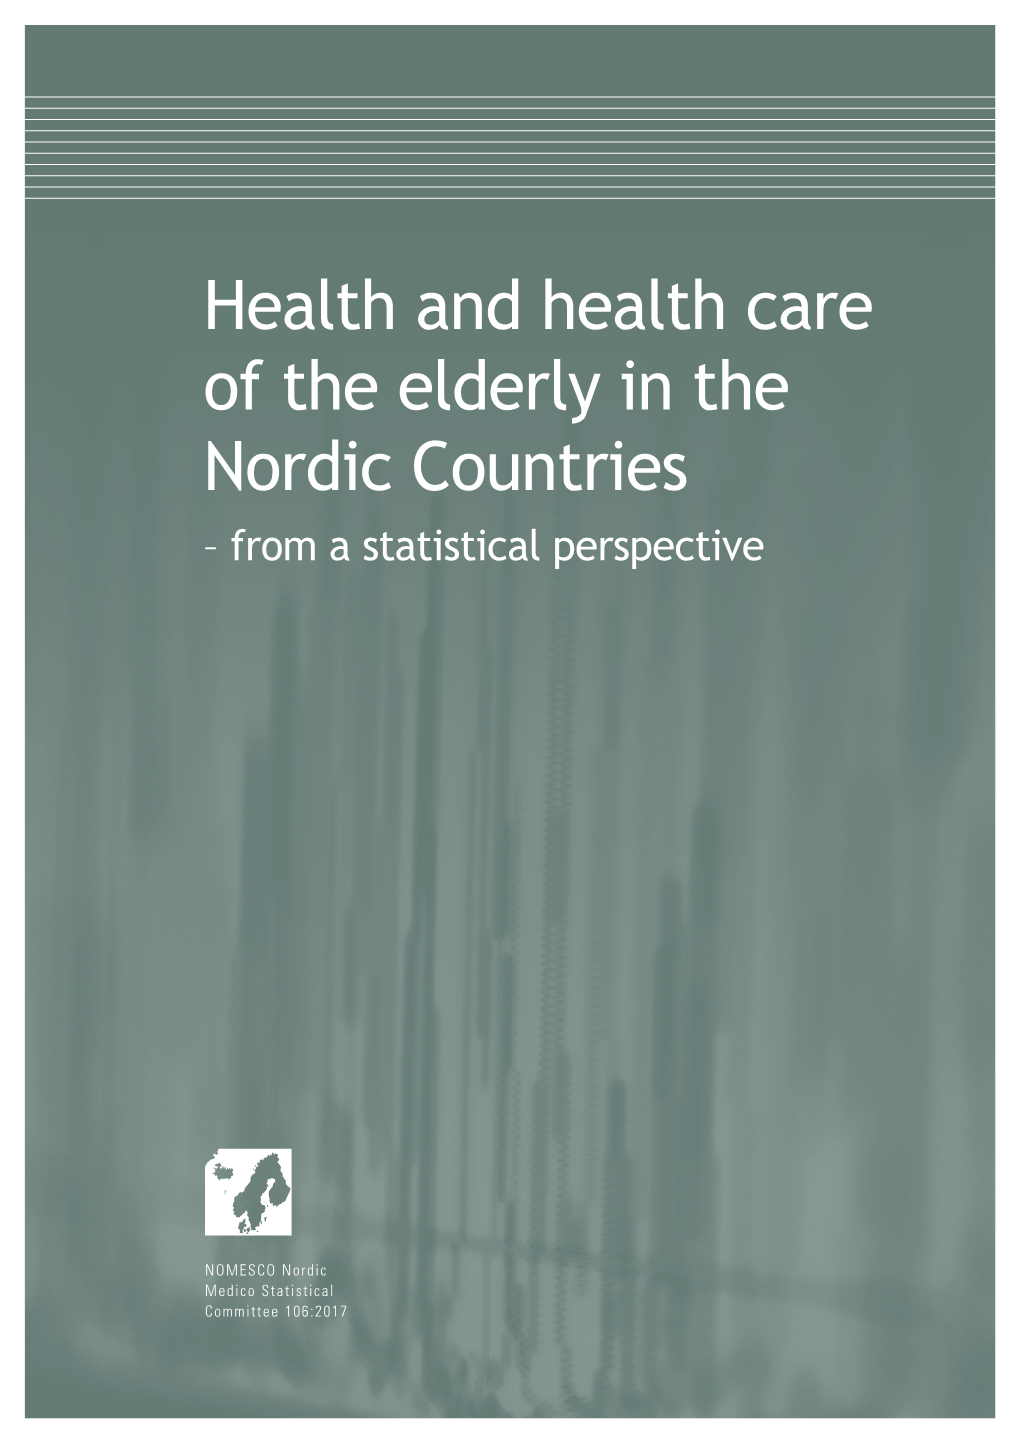 Health and Health Care of the Elderly in the Nordic Countries – from a Statistical Perspective